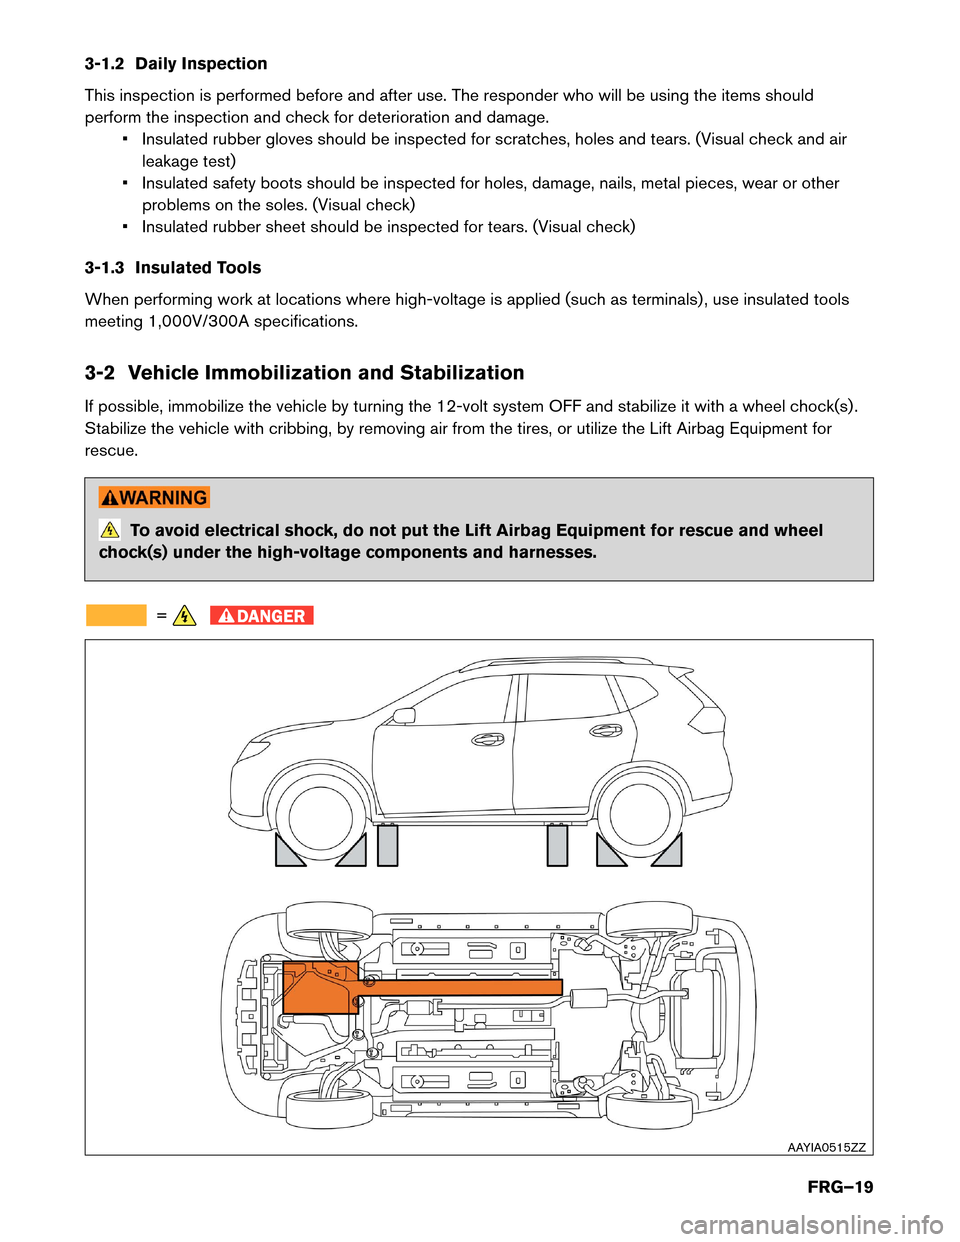 NISSAN ROGUE HYBRID 2017 2.G First Responders Guide 3-1.2 Daily Inspection
This
inspection is performed before and after use. The responder who will be using the items should
perform the inspection and check for deterioration and damage. • Insulated 